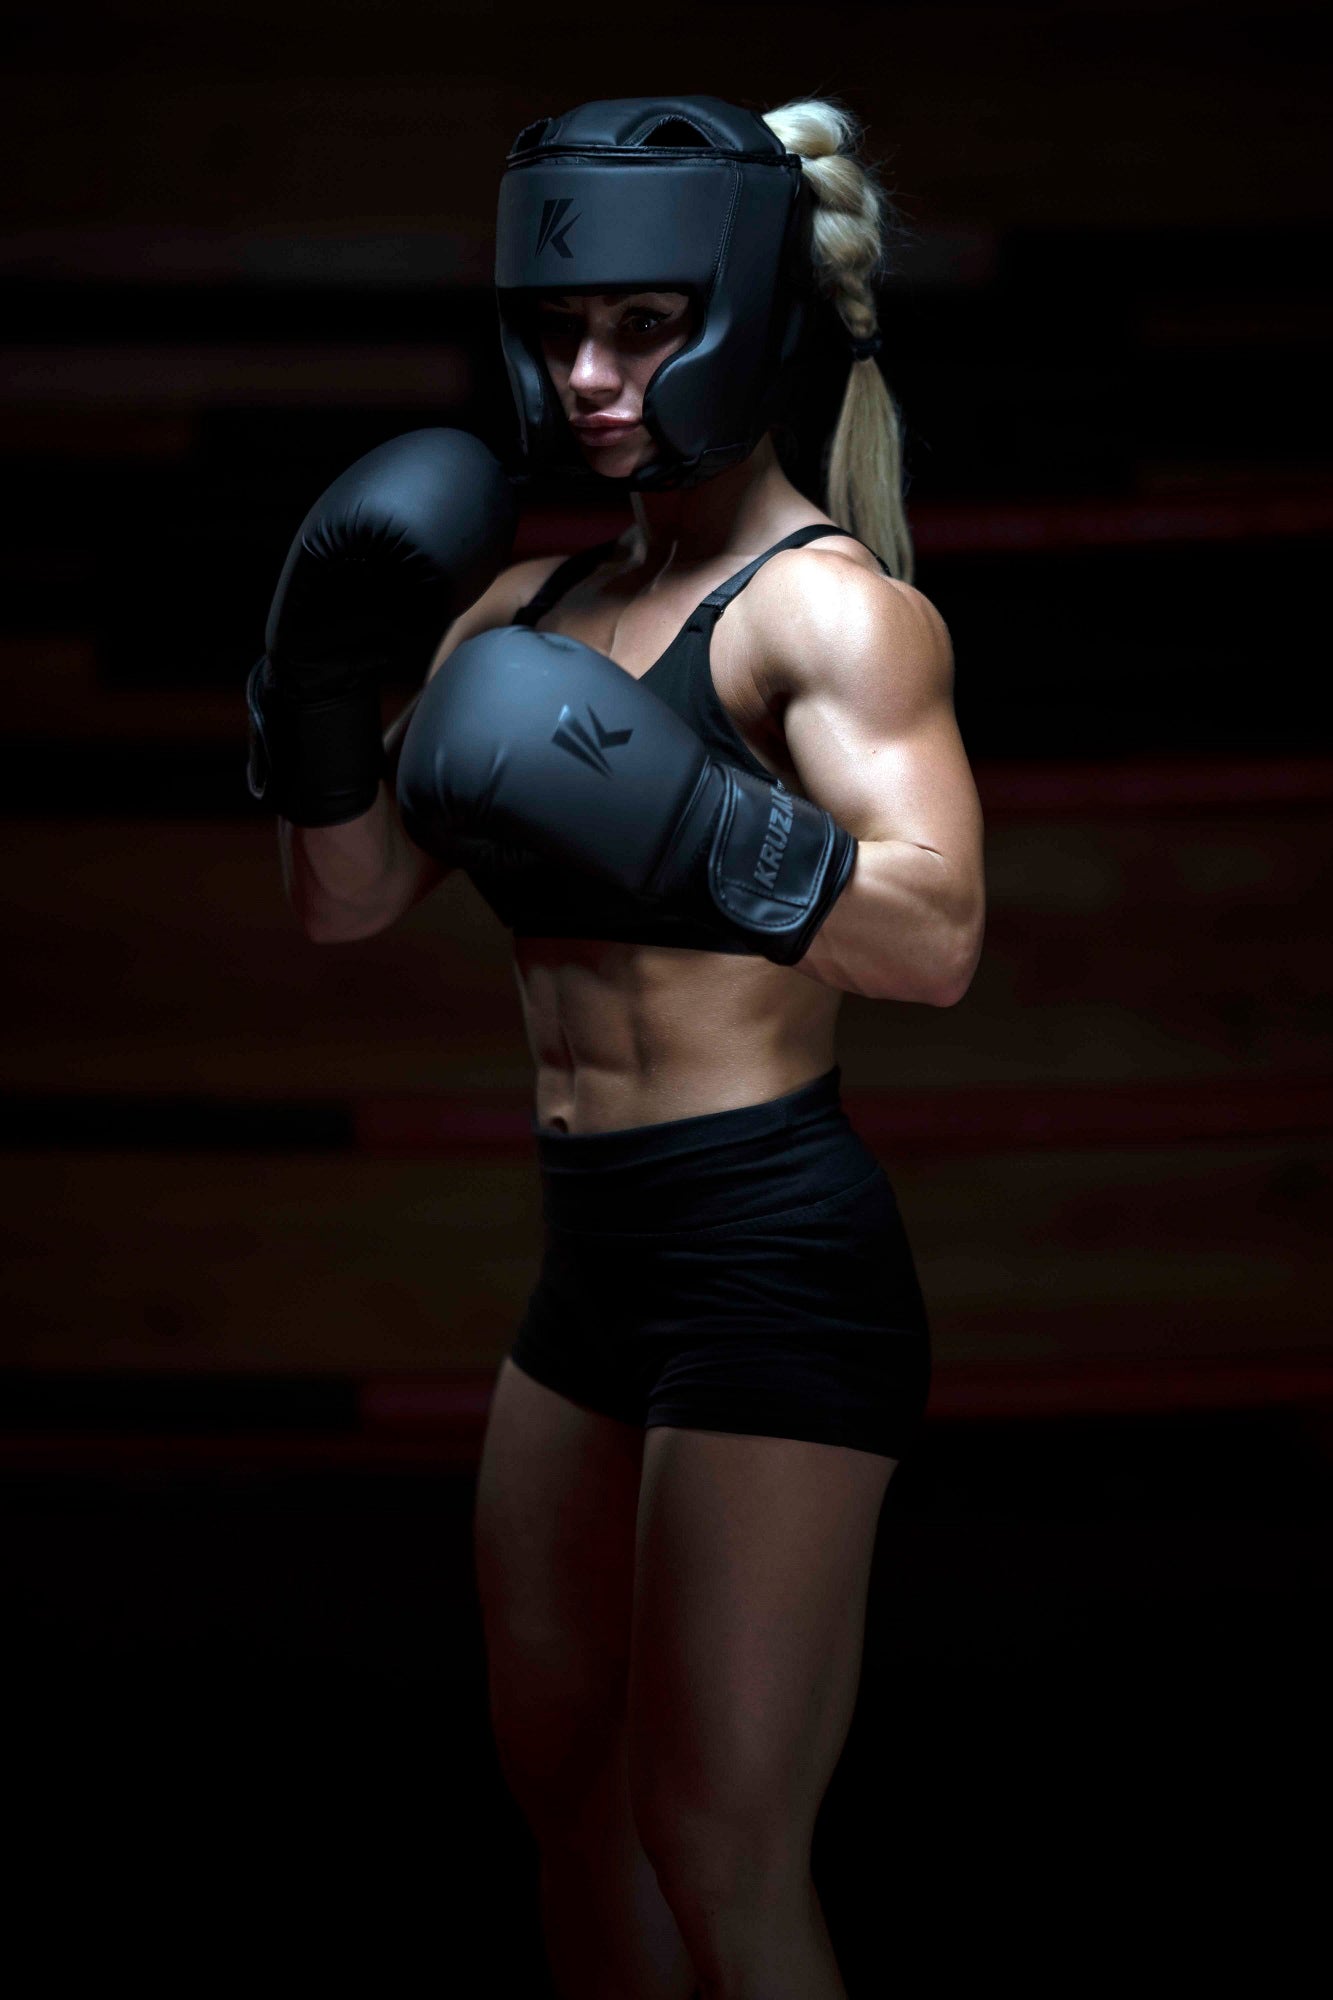 Matte-Black Boxing Gloves and Head Guard Set